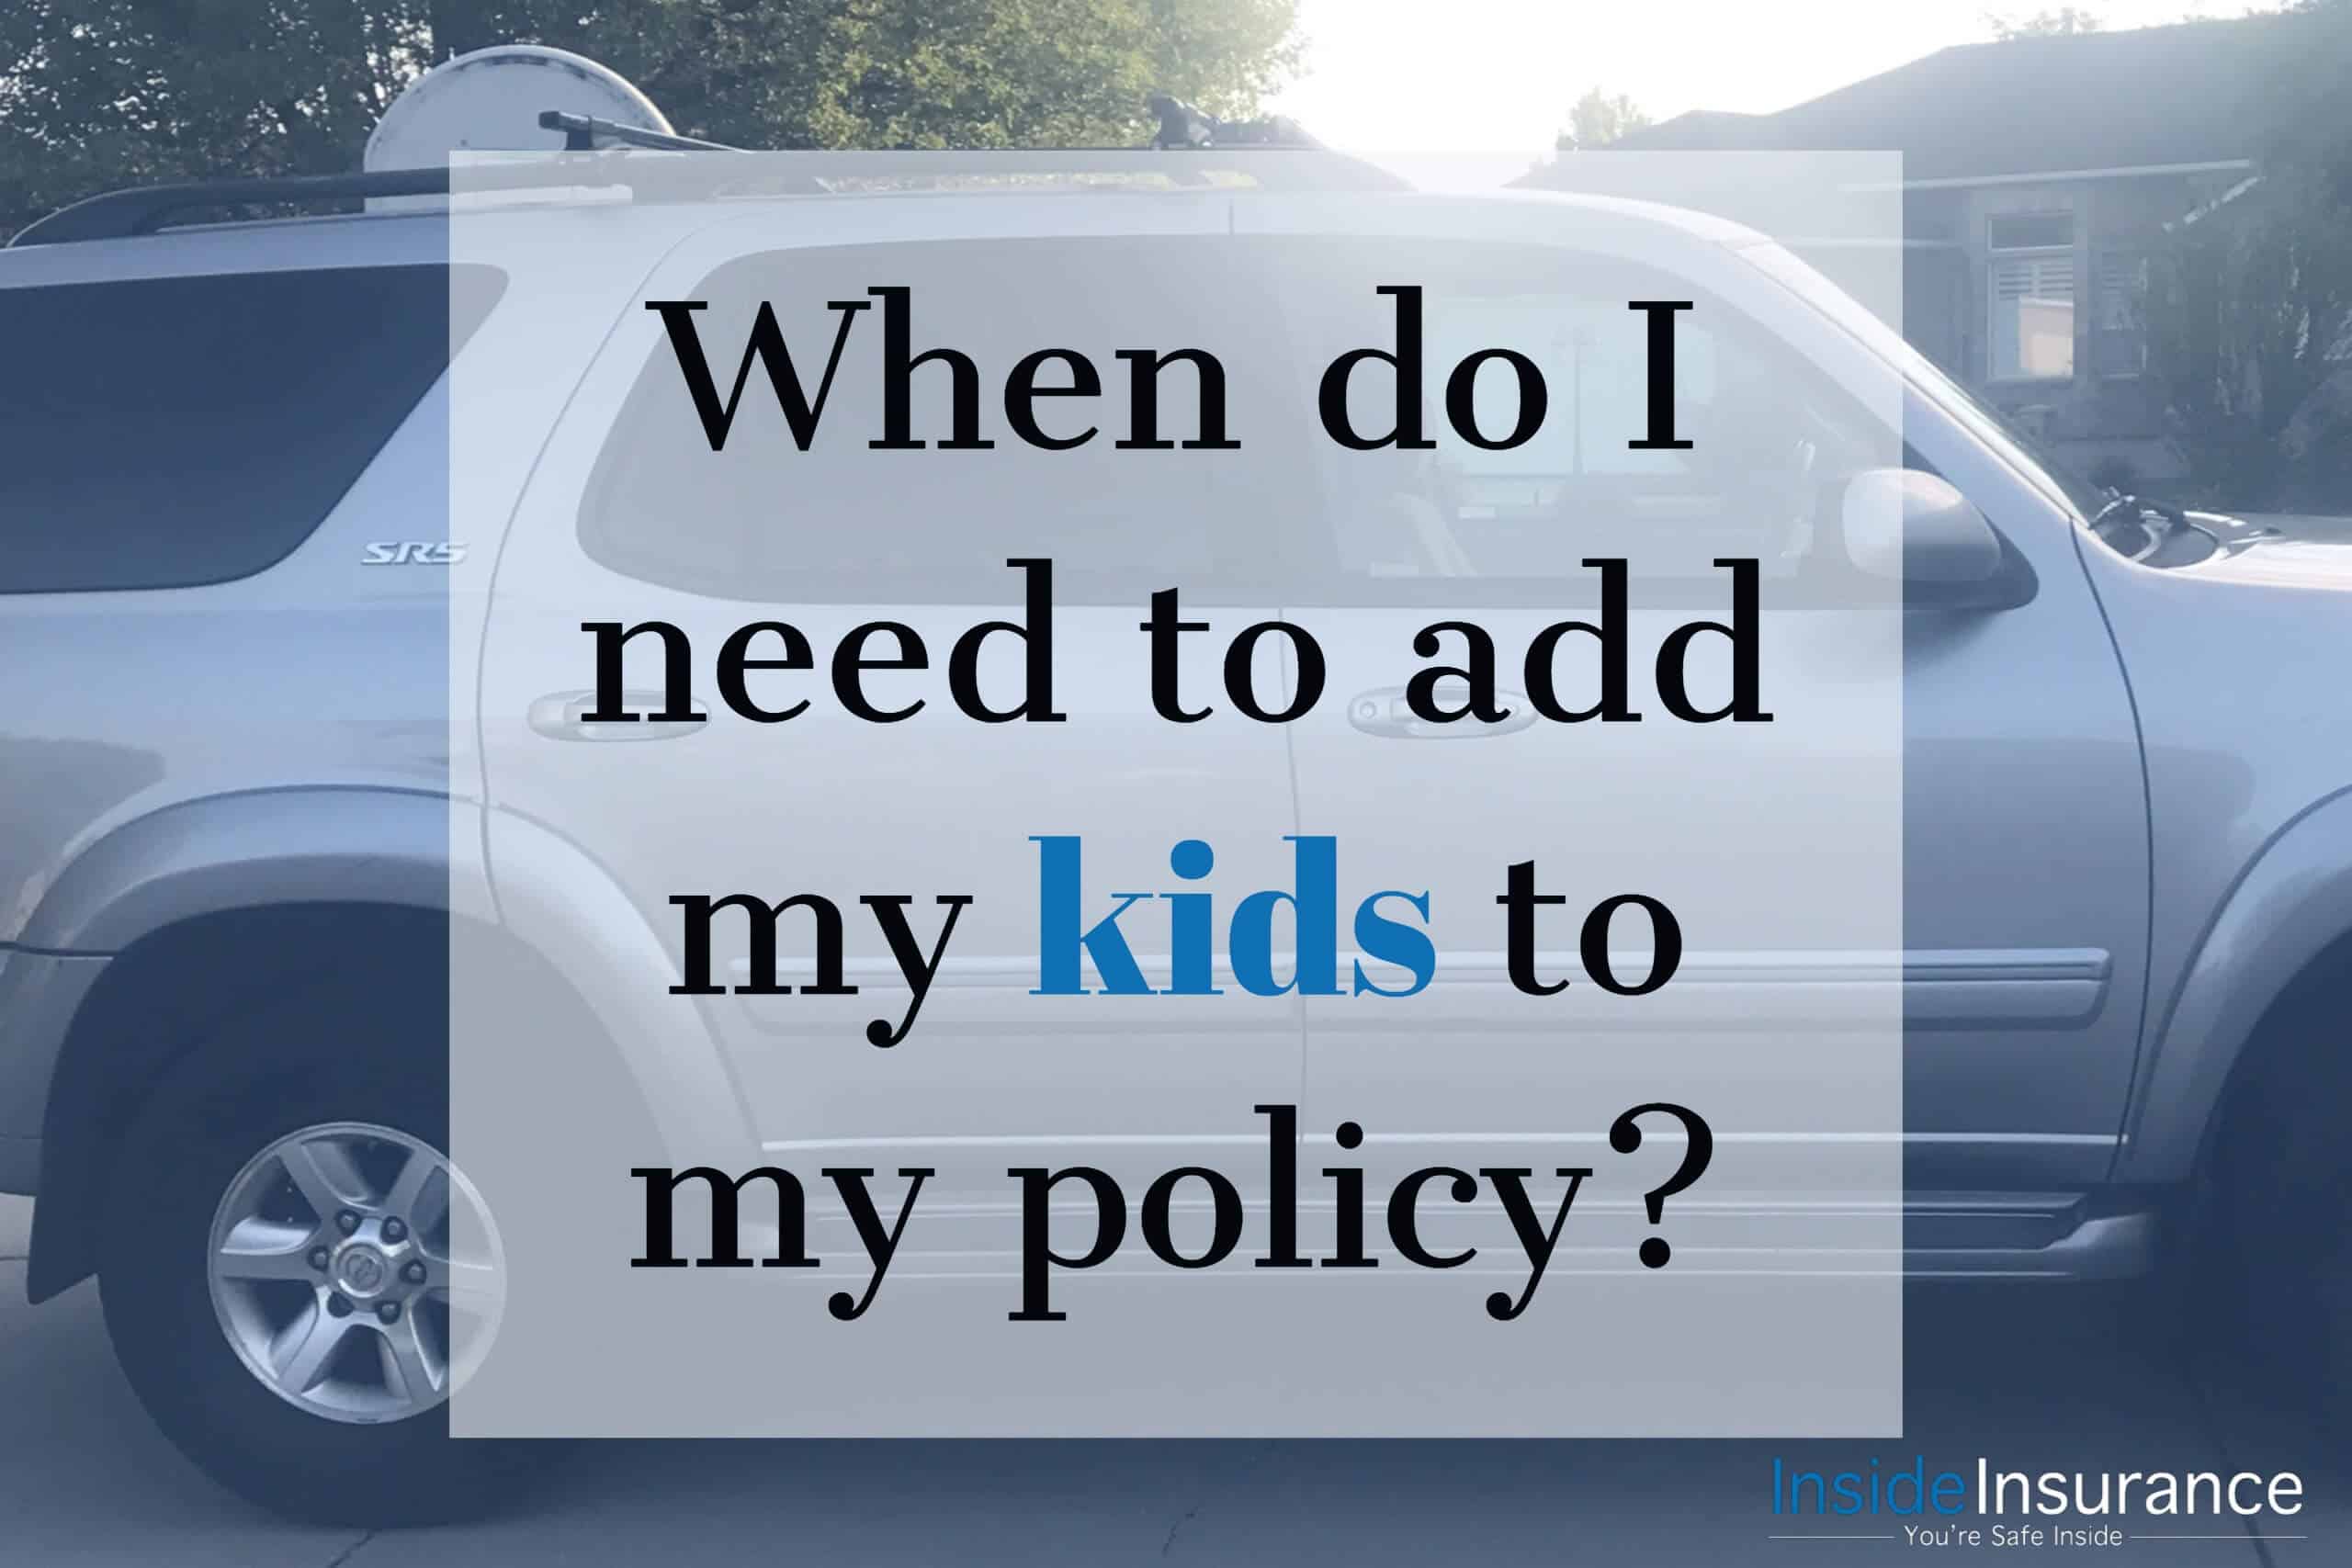 alt="A silver SUV on the background with a note that says 'When do I need to add my kids to my policy'."